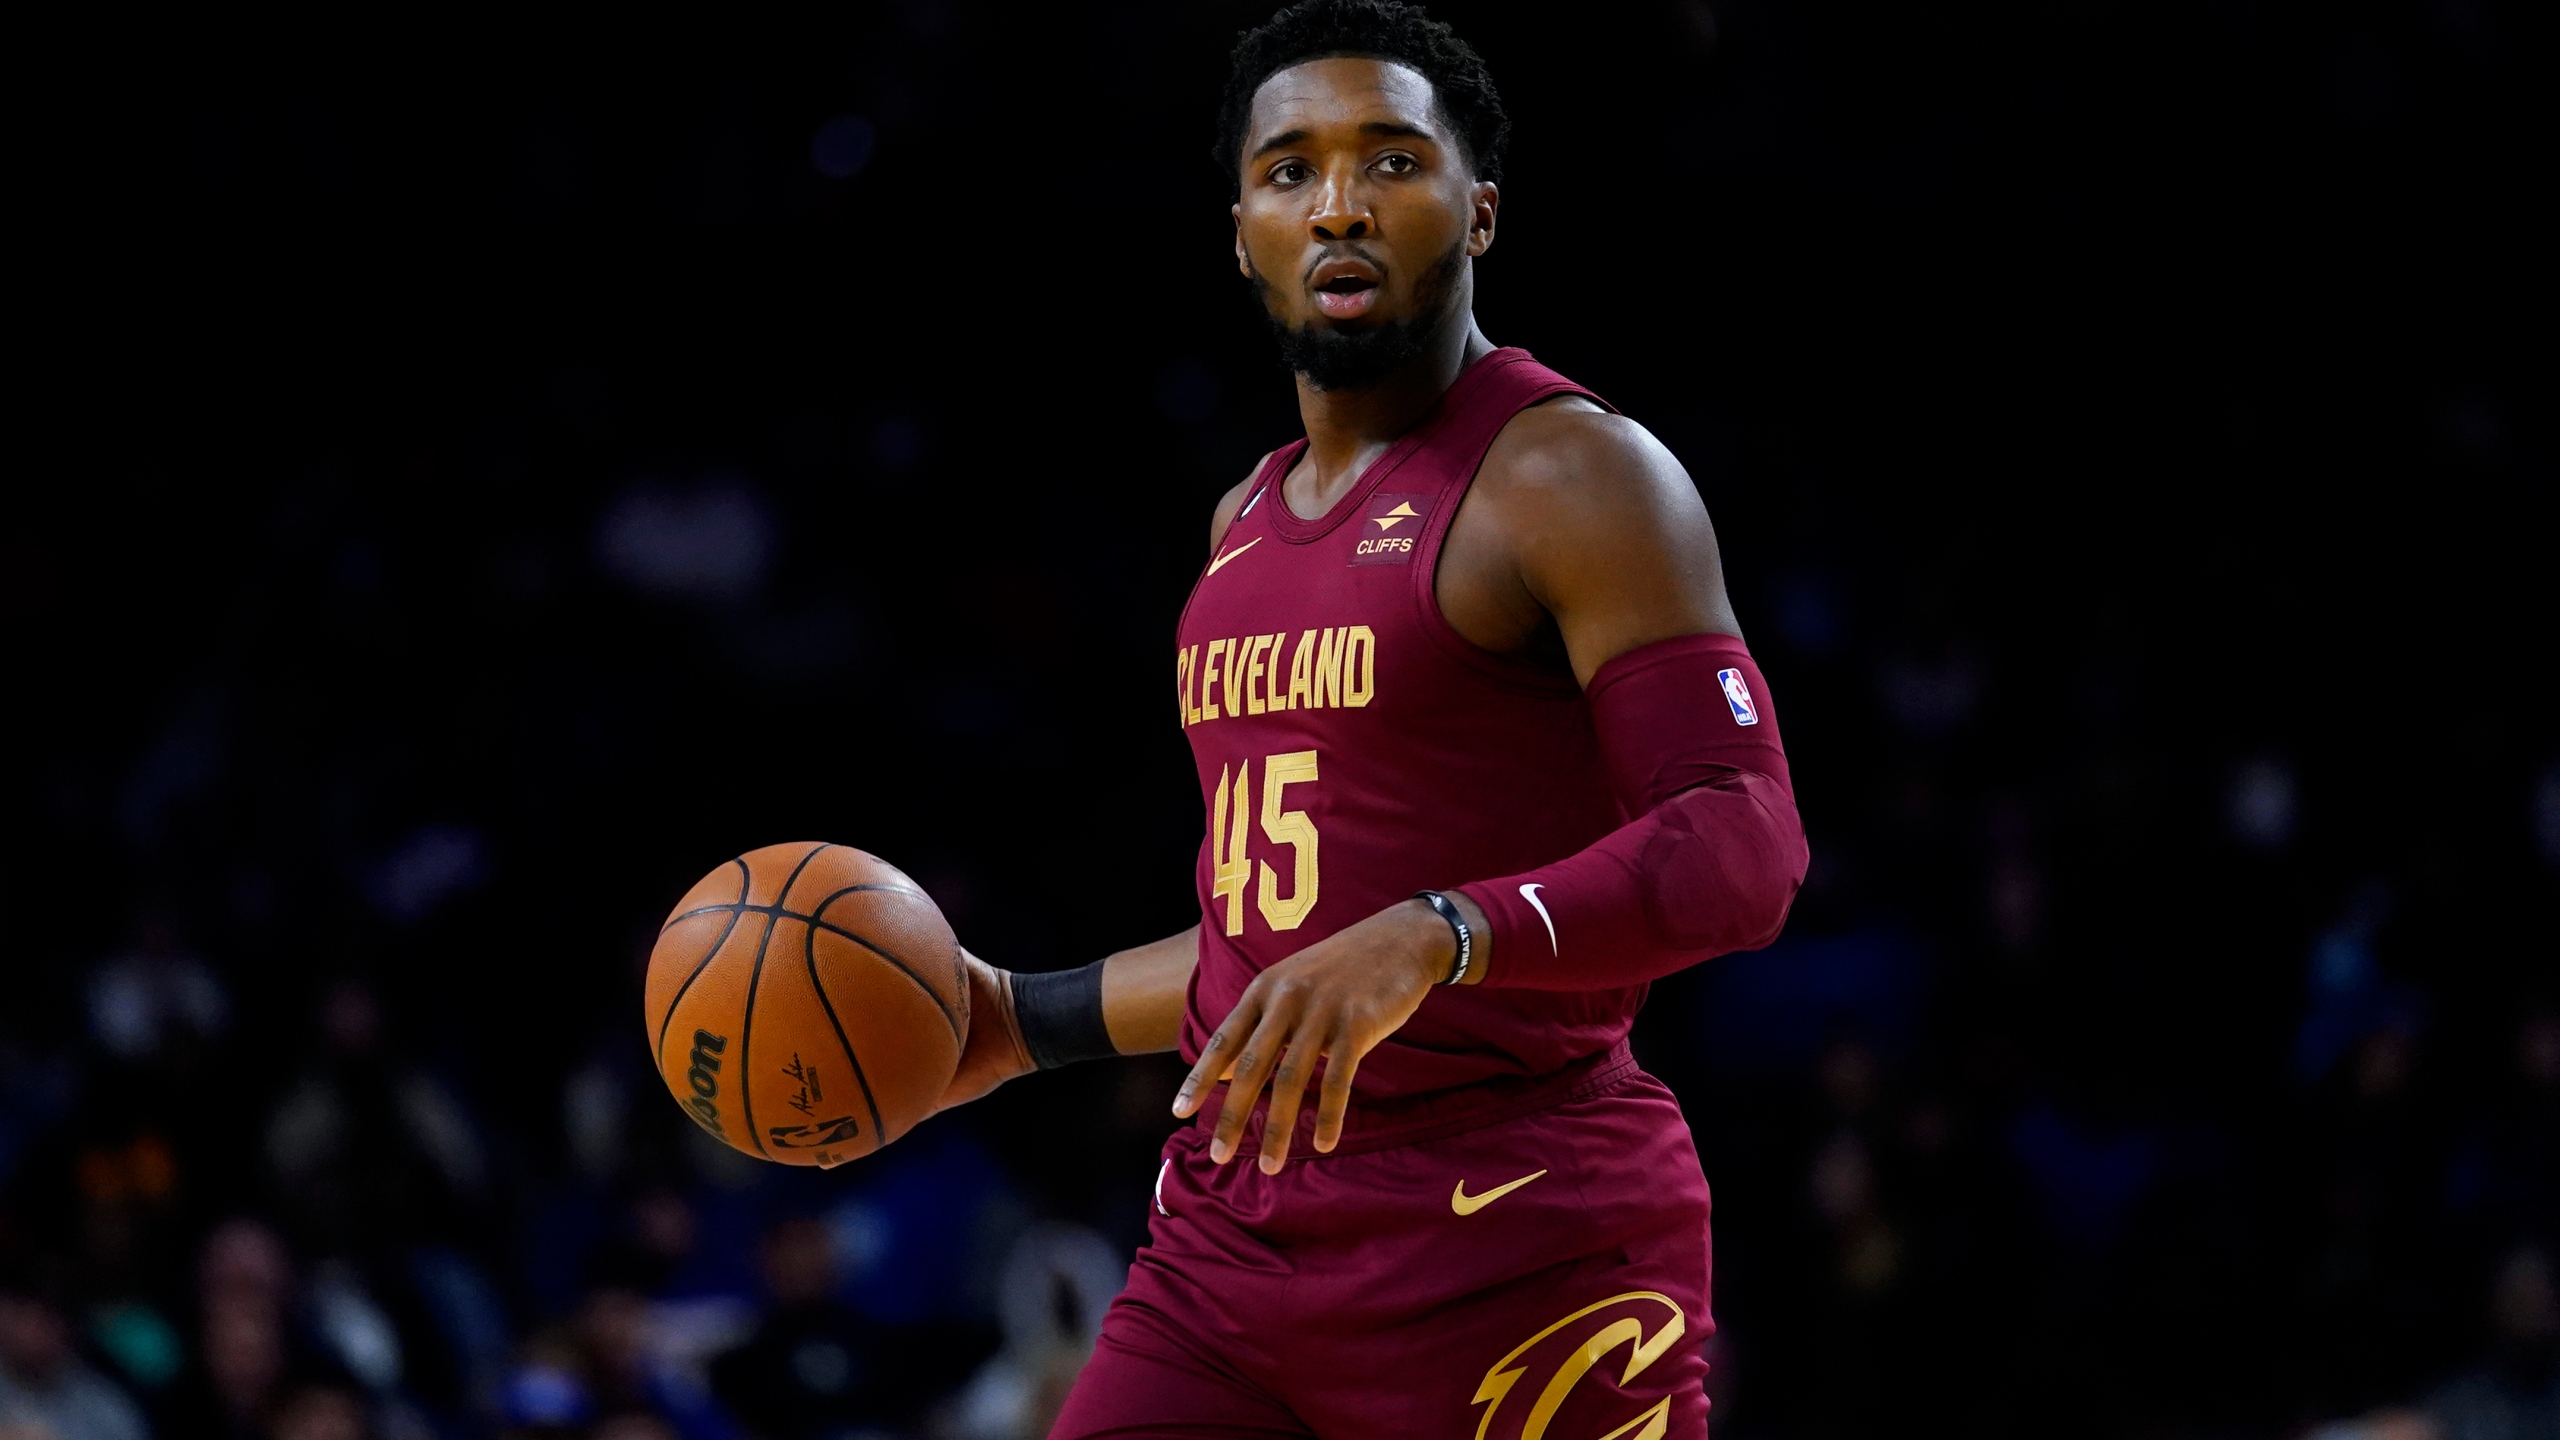 Cleveland Cavaliers' prized acquisition Donovan Mitchell debuts in preseason opener